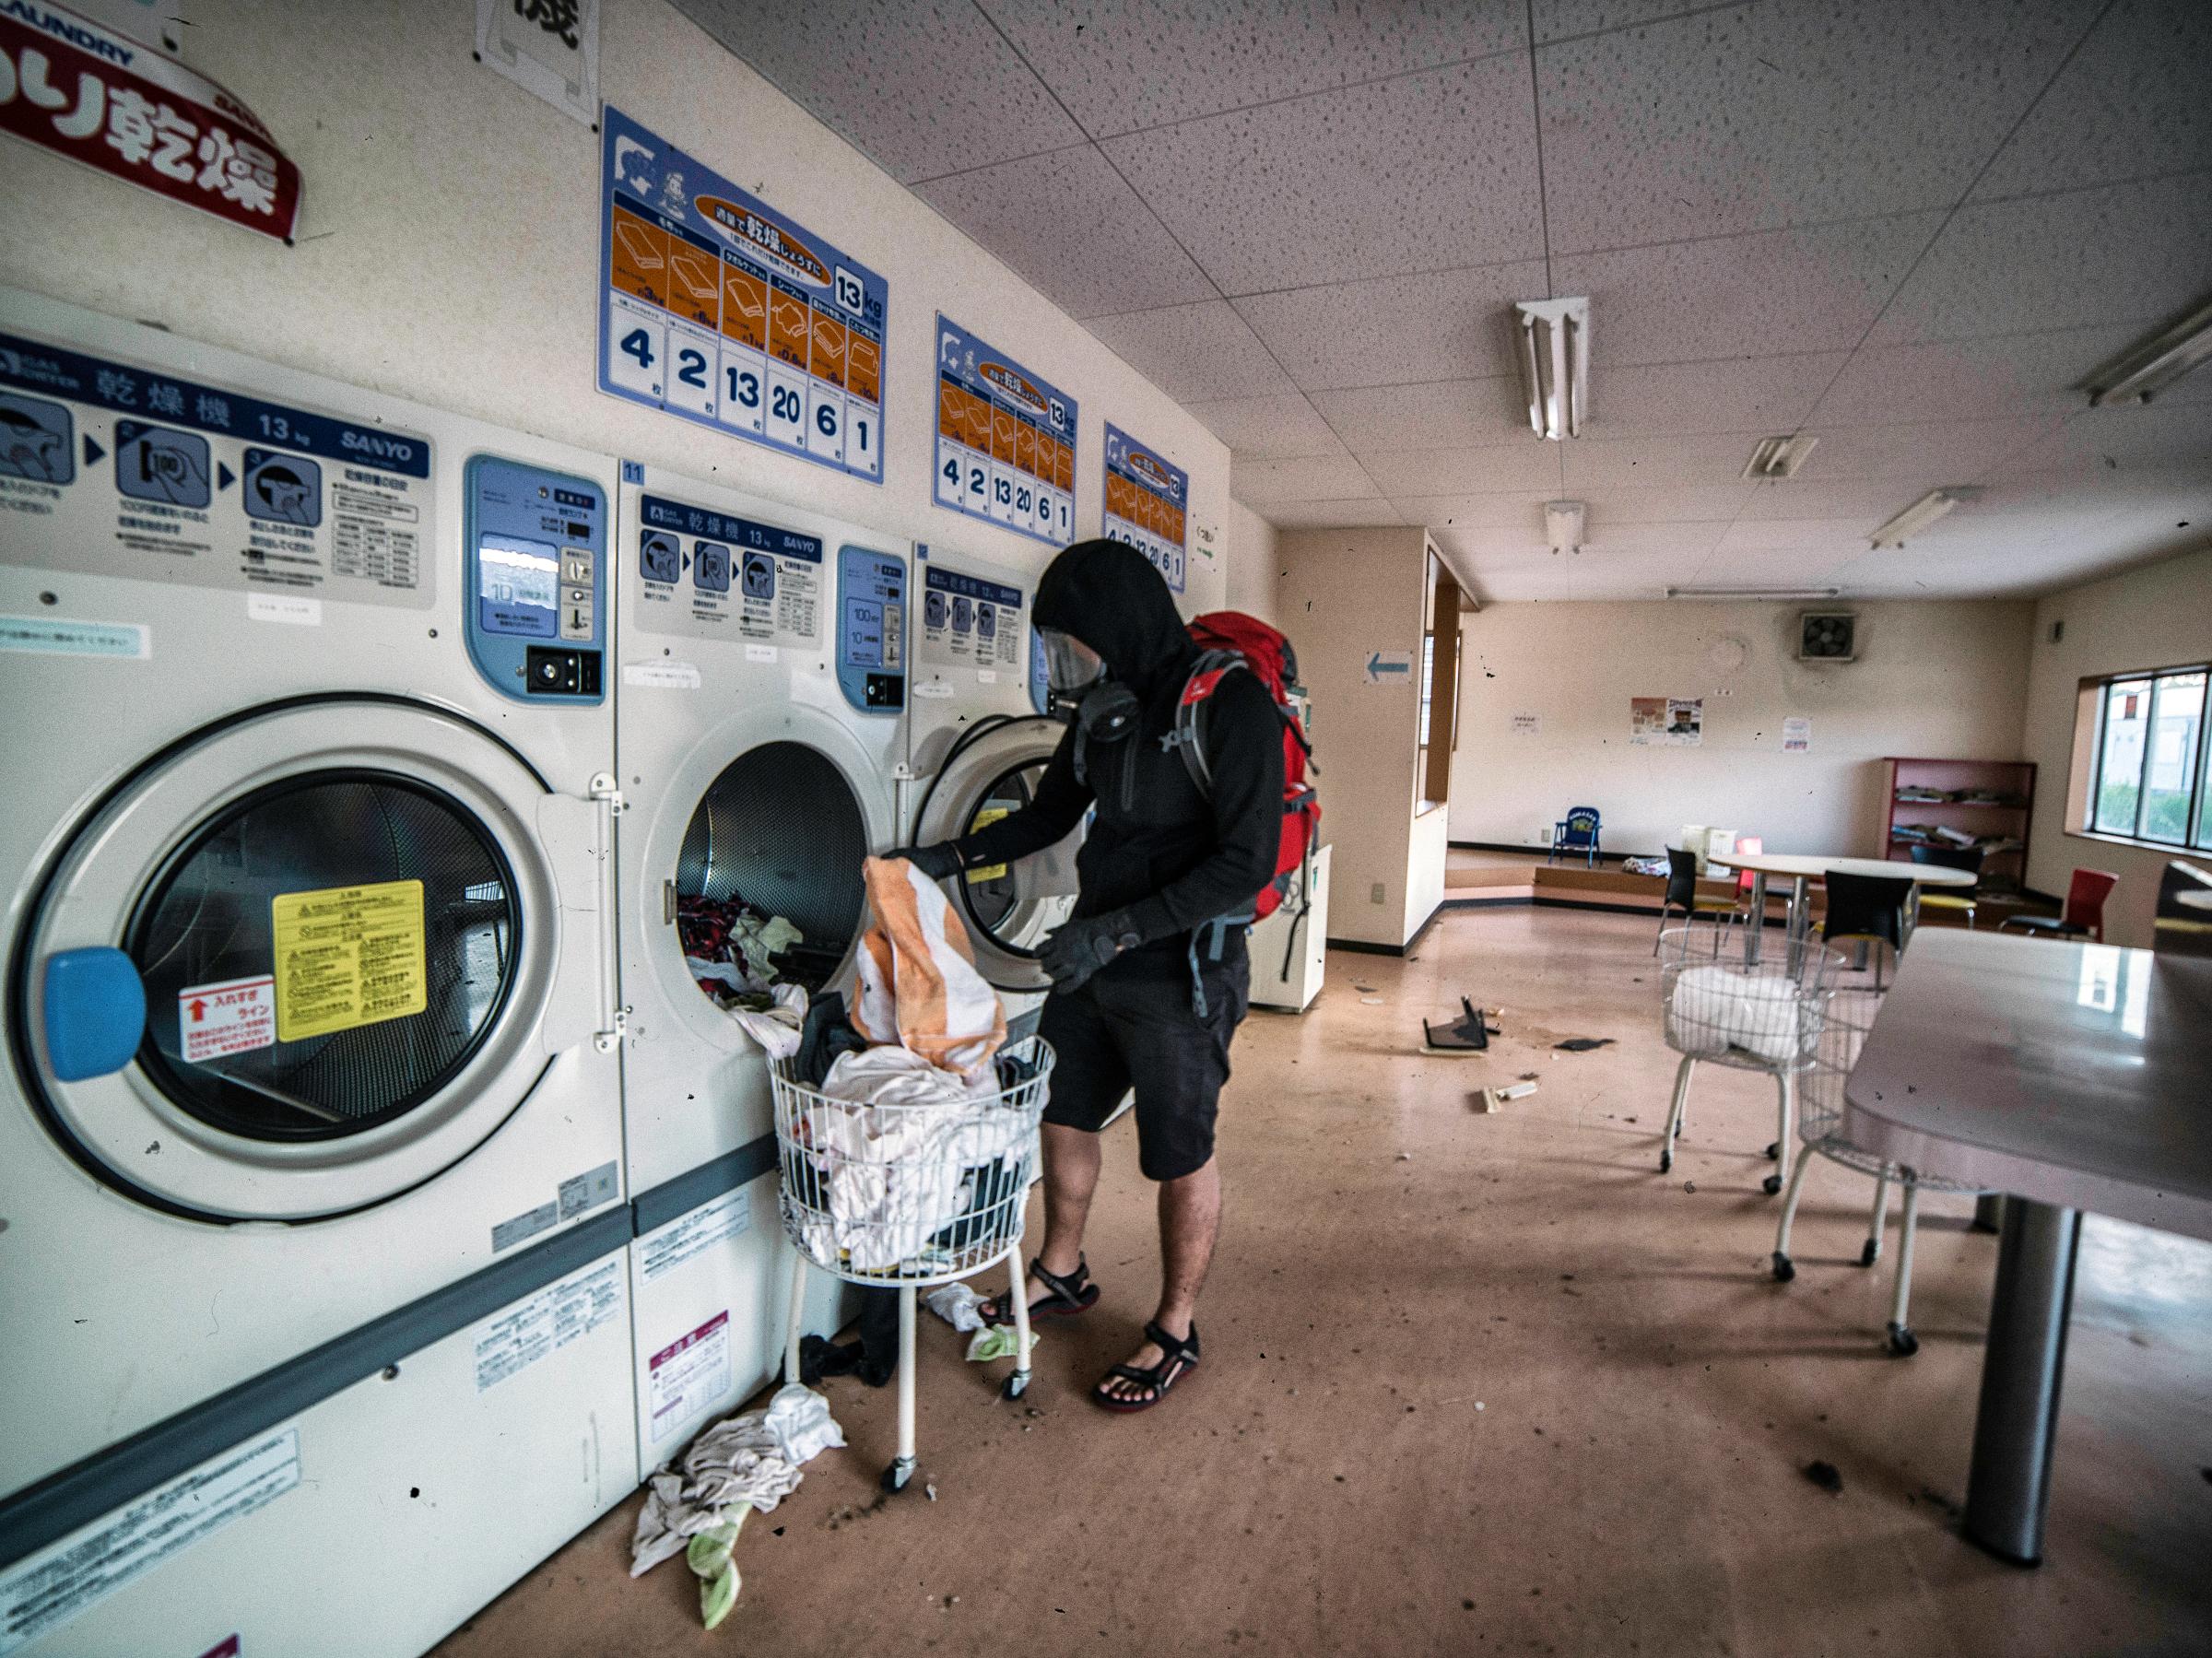 The photographer "does laundry" at a laundromat in Futaba.